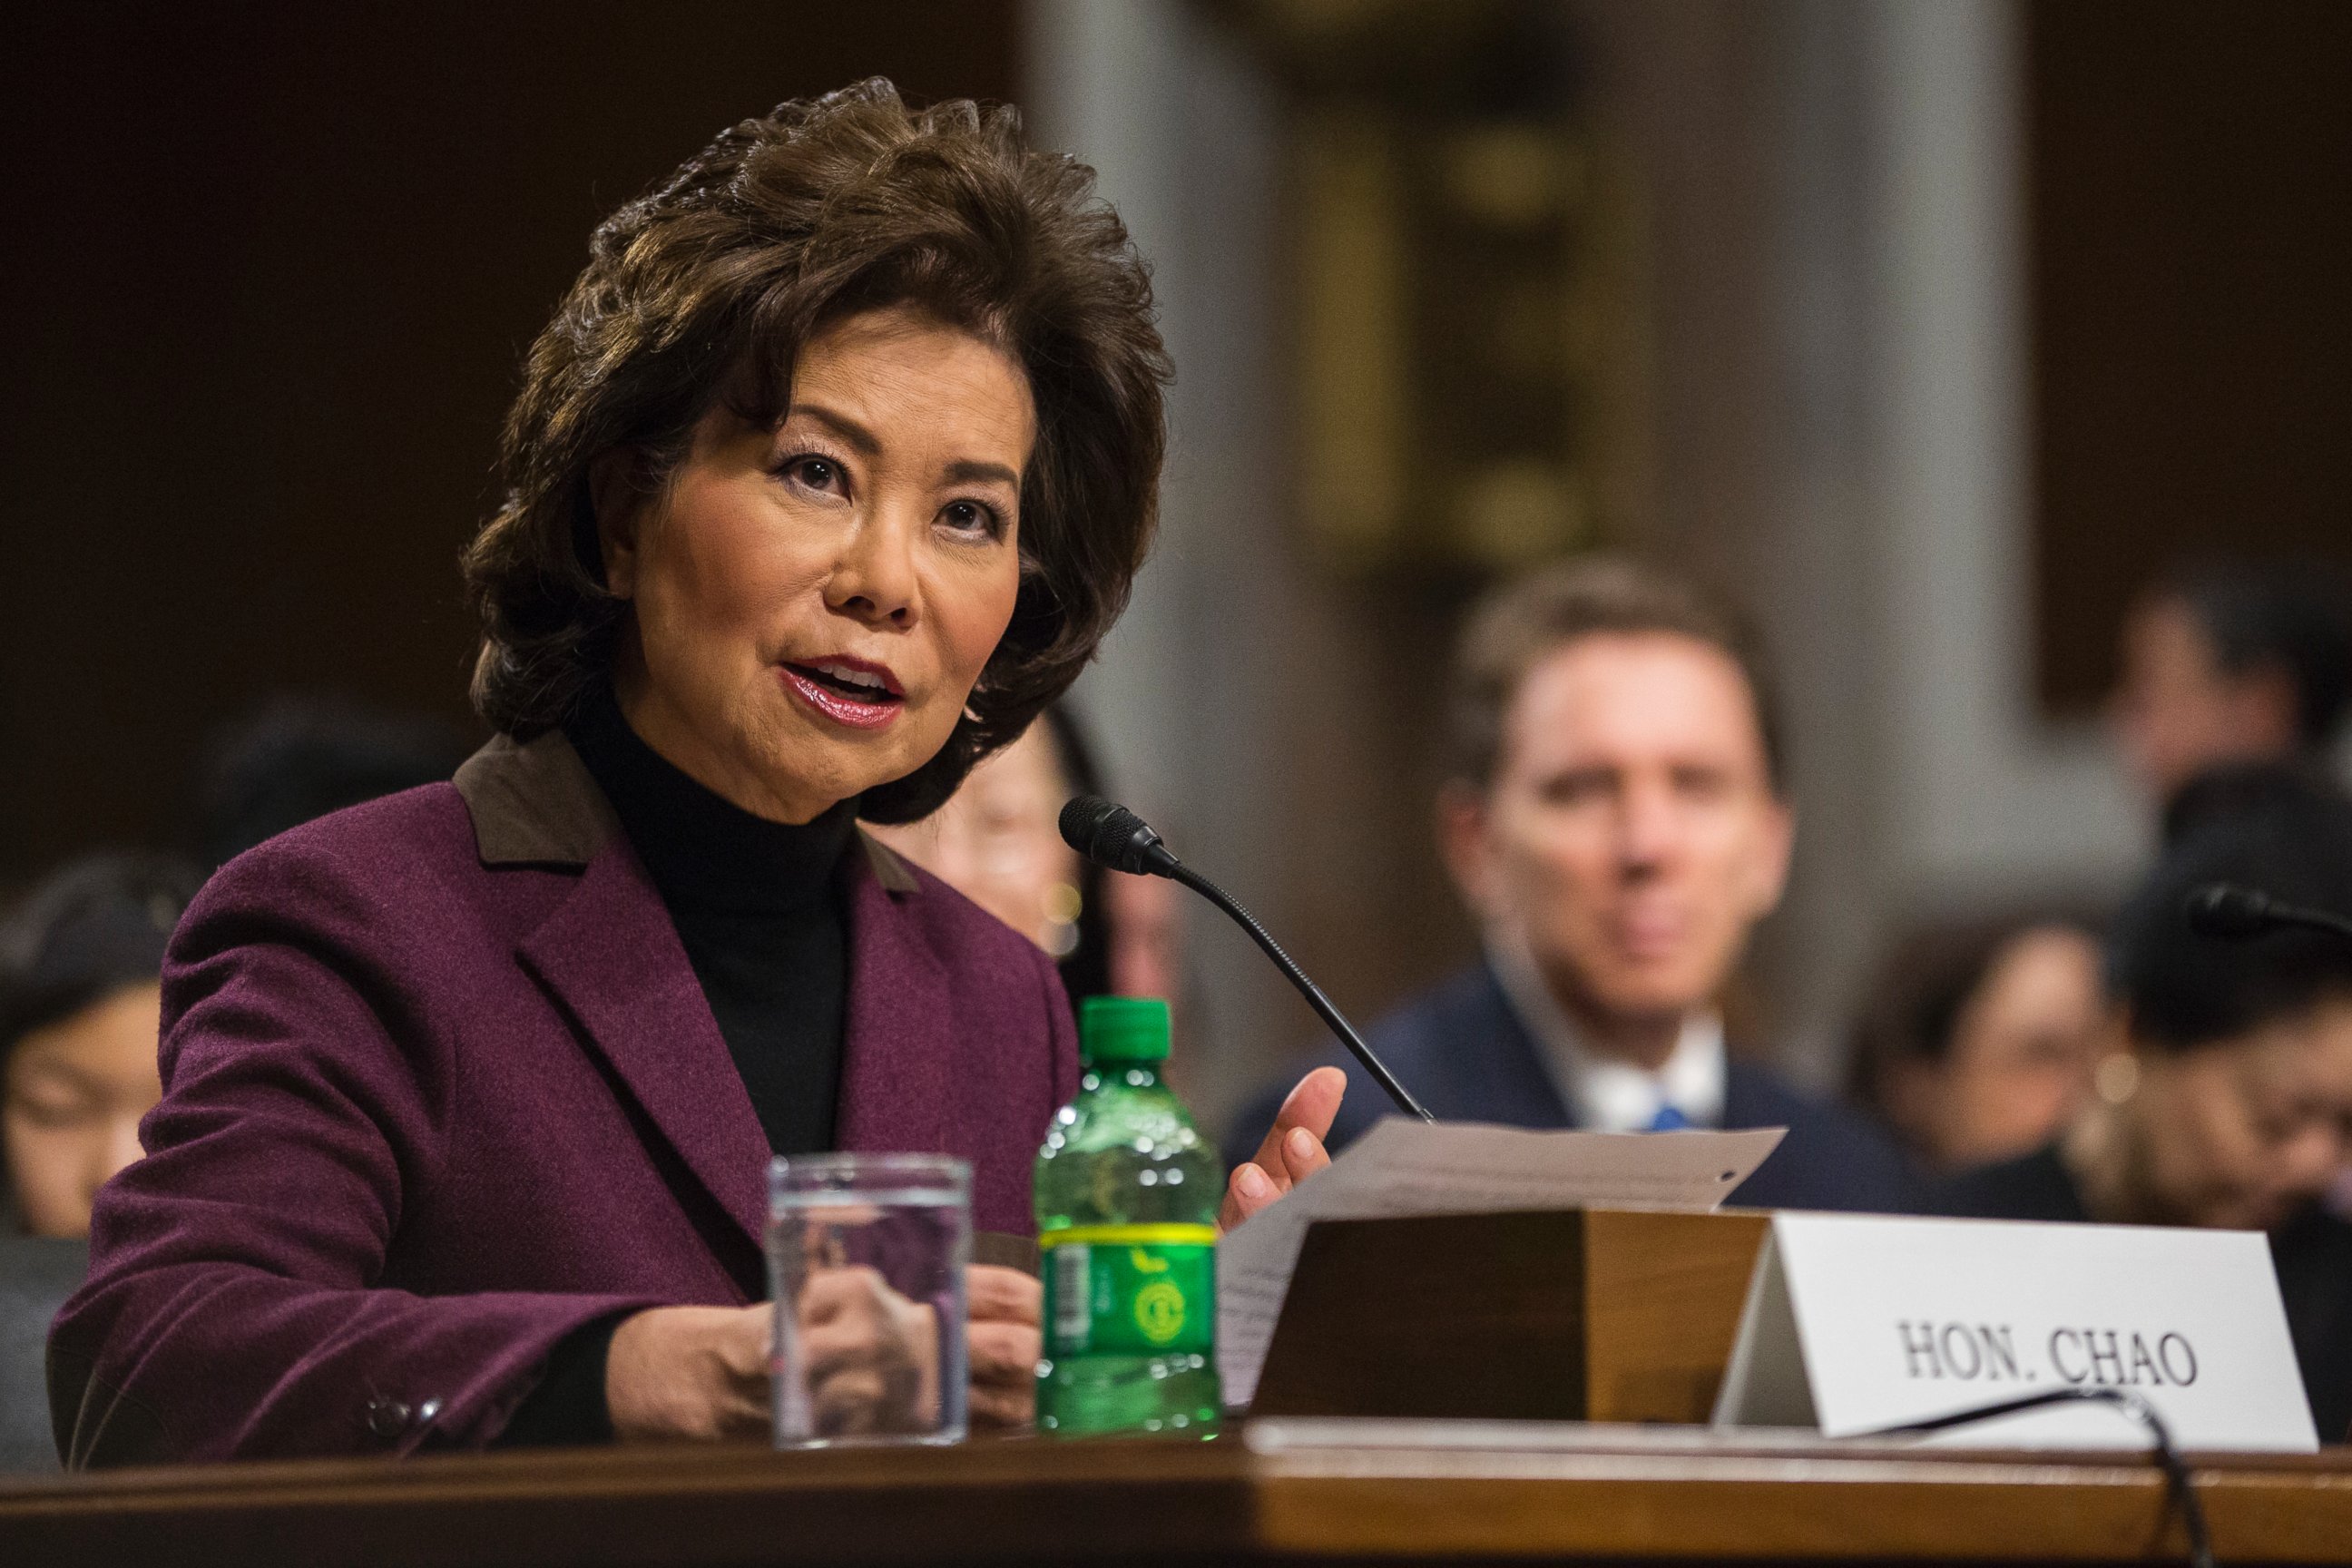 PHOTO: Transportation Secretary-designate Elaine Chao testifies on Capitol Hill in Washington, D.C., Jan. 11, 2017, at her confirmation hearing before the Senate Commerce, Science, and Transportation Committee.